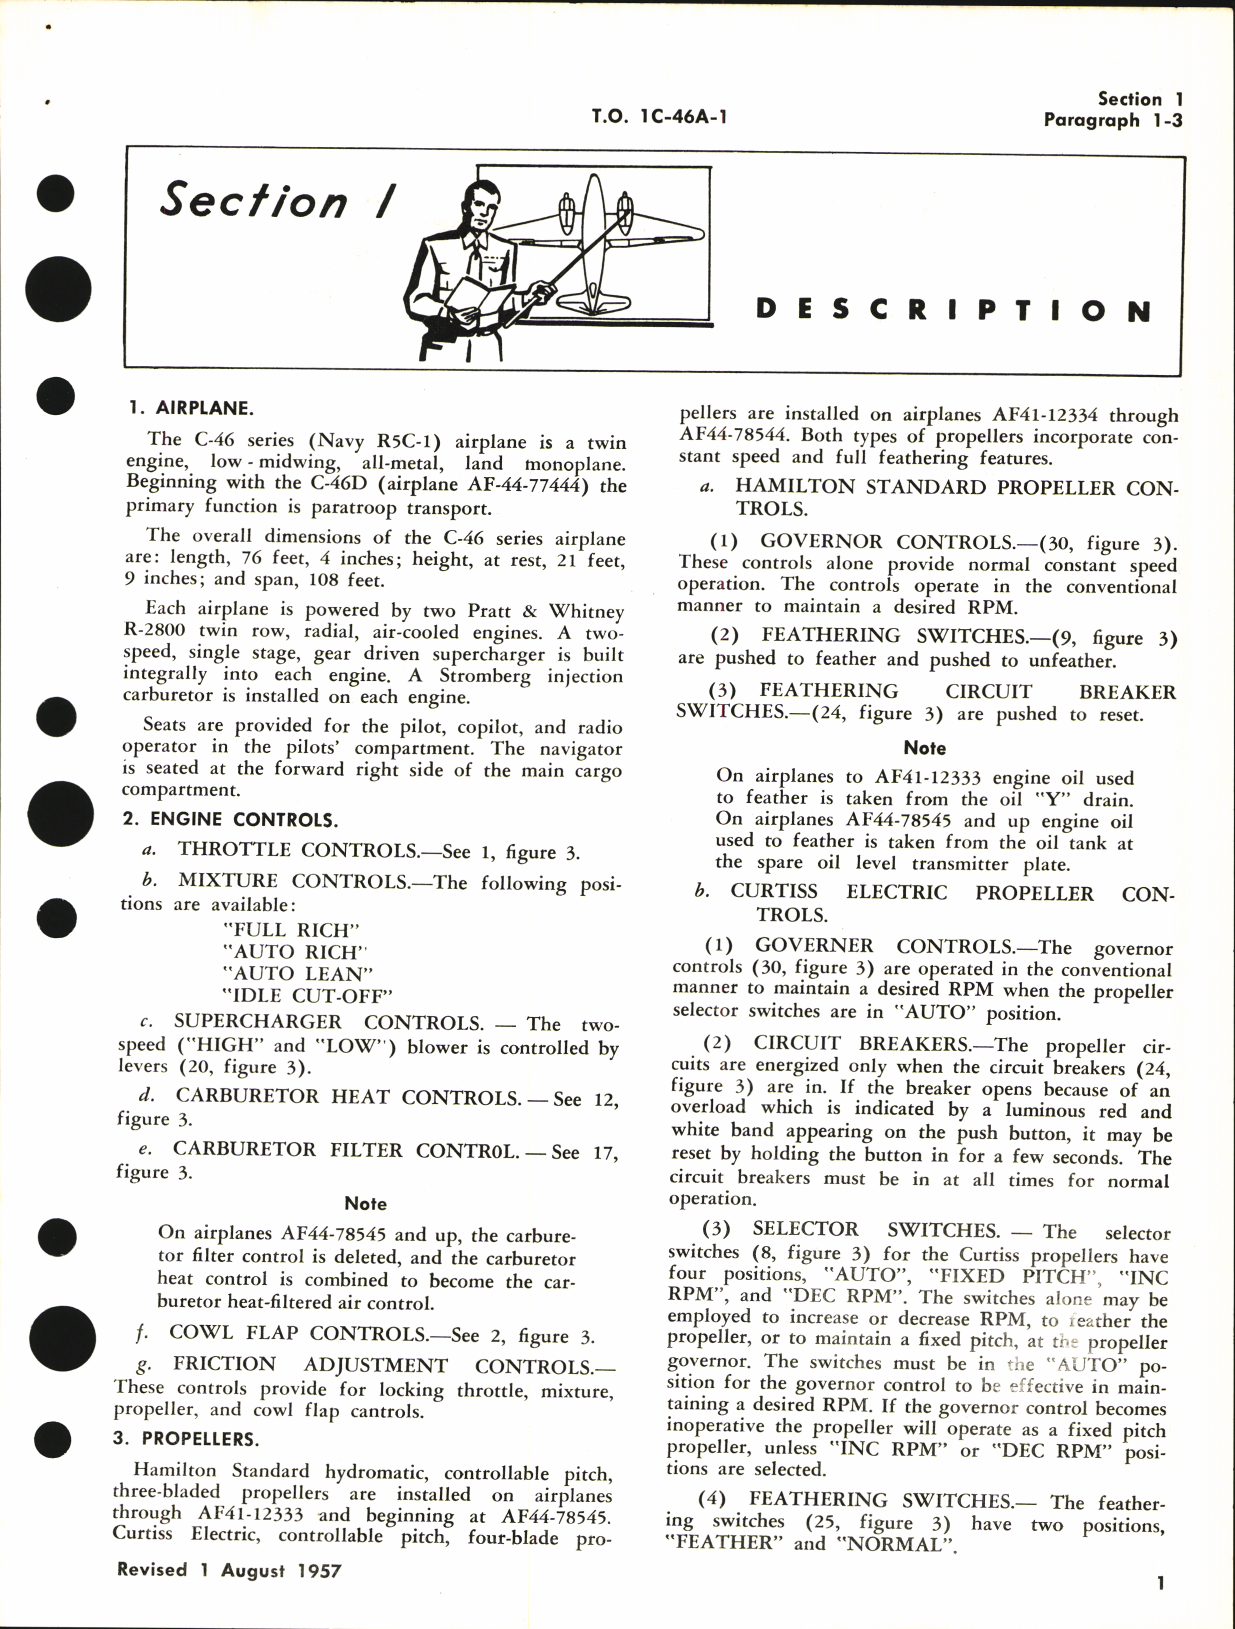 Sample page 7 from AirCorps Library document: Flight Handbook for C-46A, C-46D, C-46F, and R5C-1